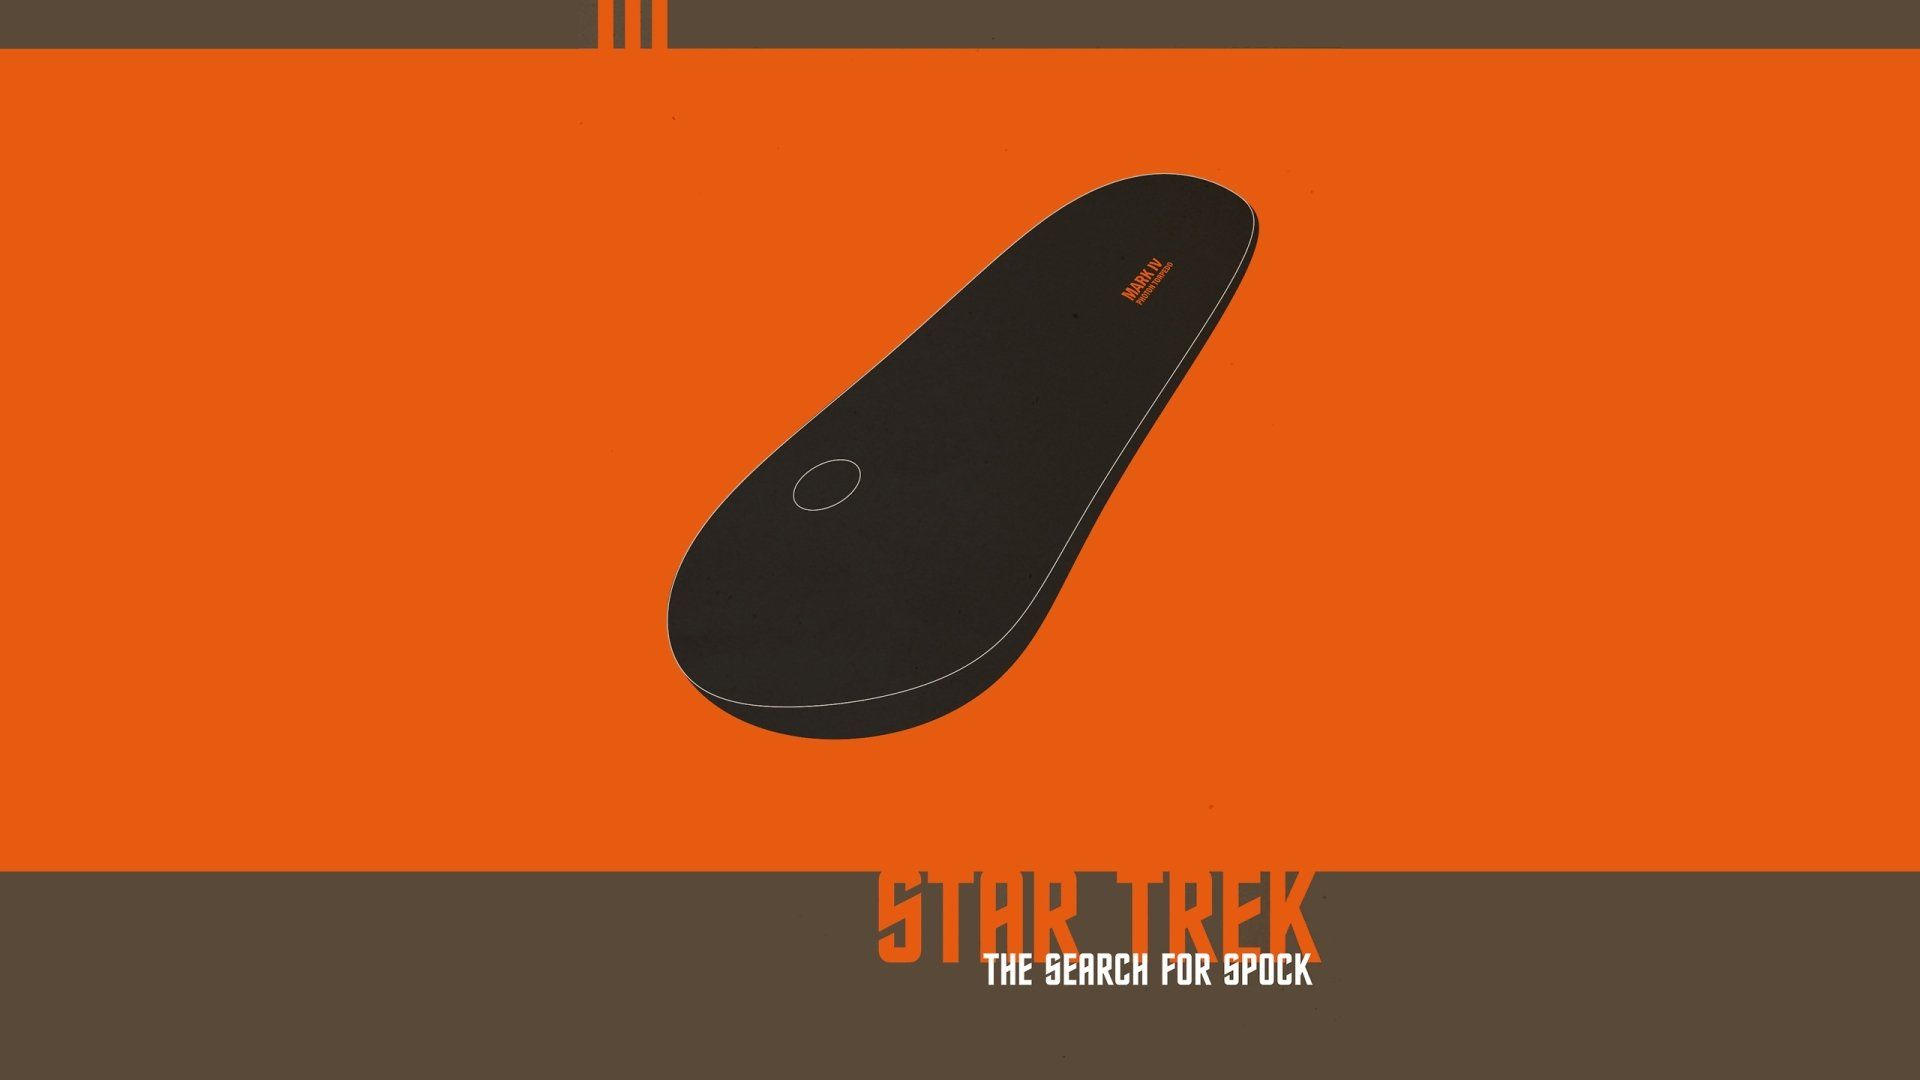 Movie Star Trek Iii The Search For Spock Wallpaper